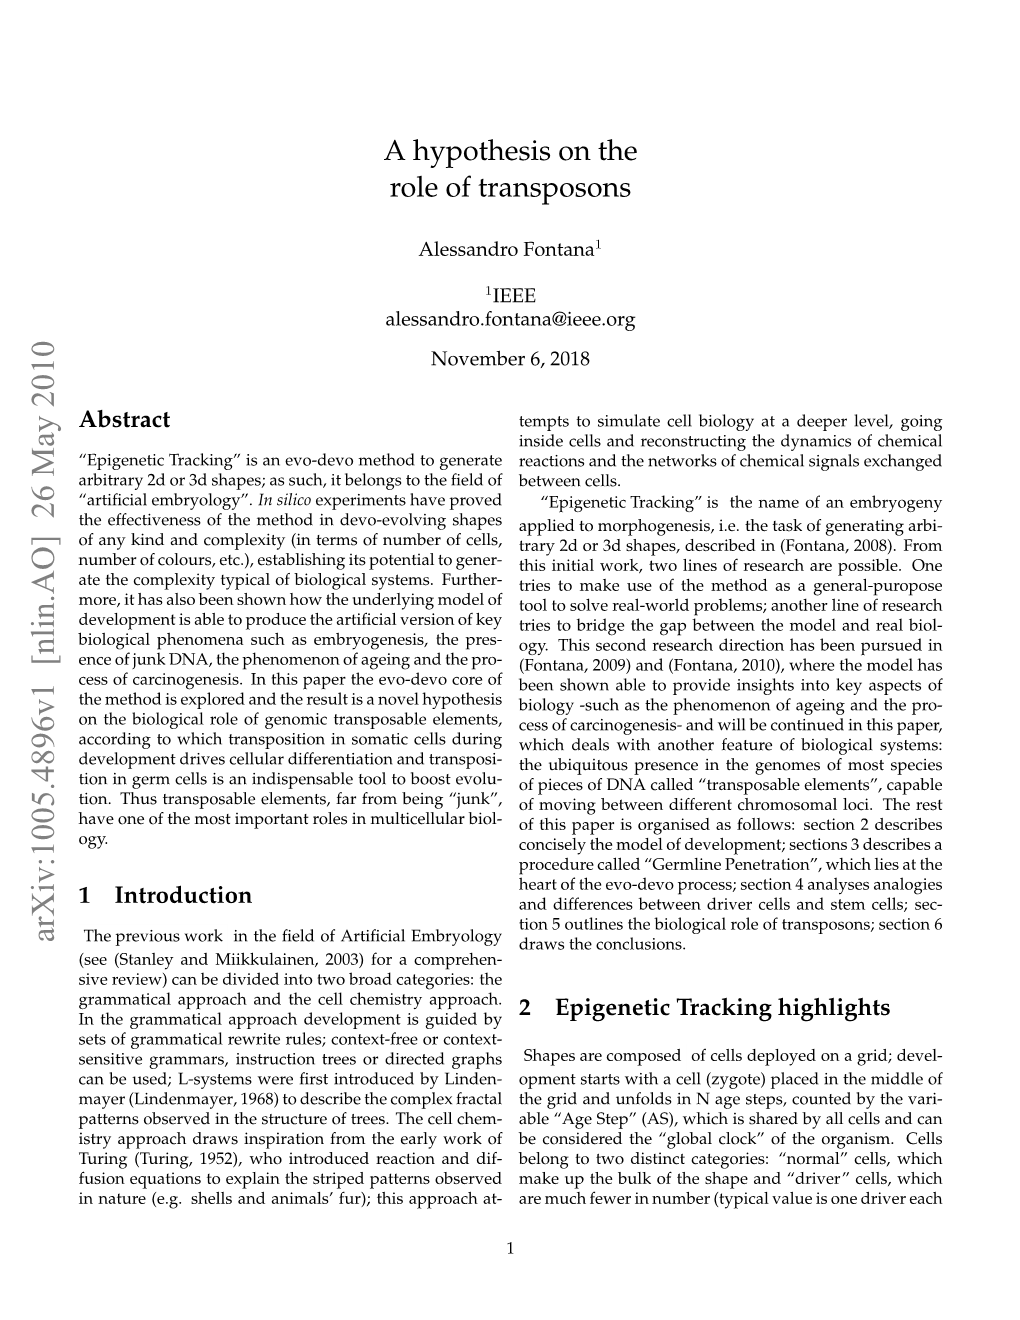 A Hypothesis on the Role of Transposons